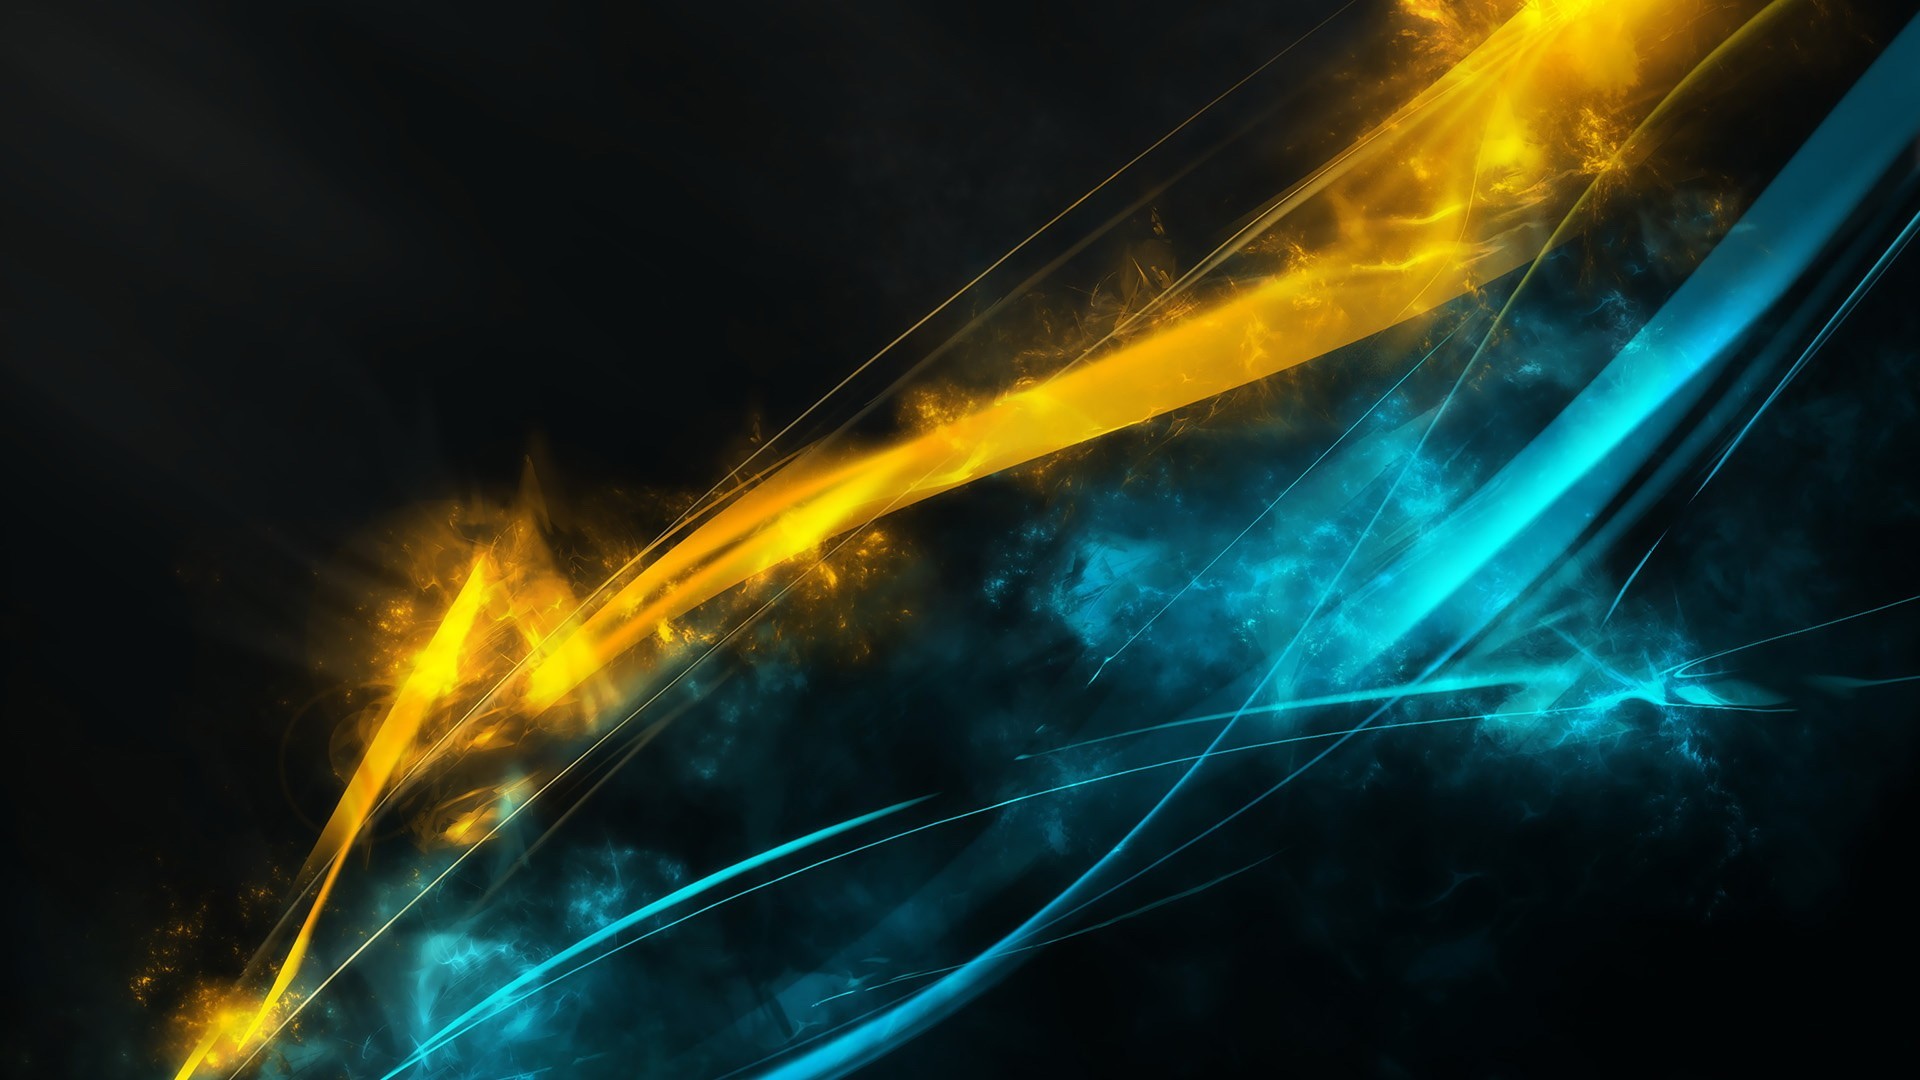 General 1920x1080 digital art abstract shapes lines black background blue yellow cyan black